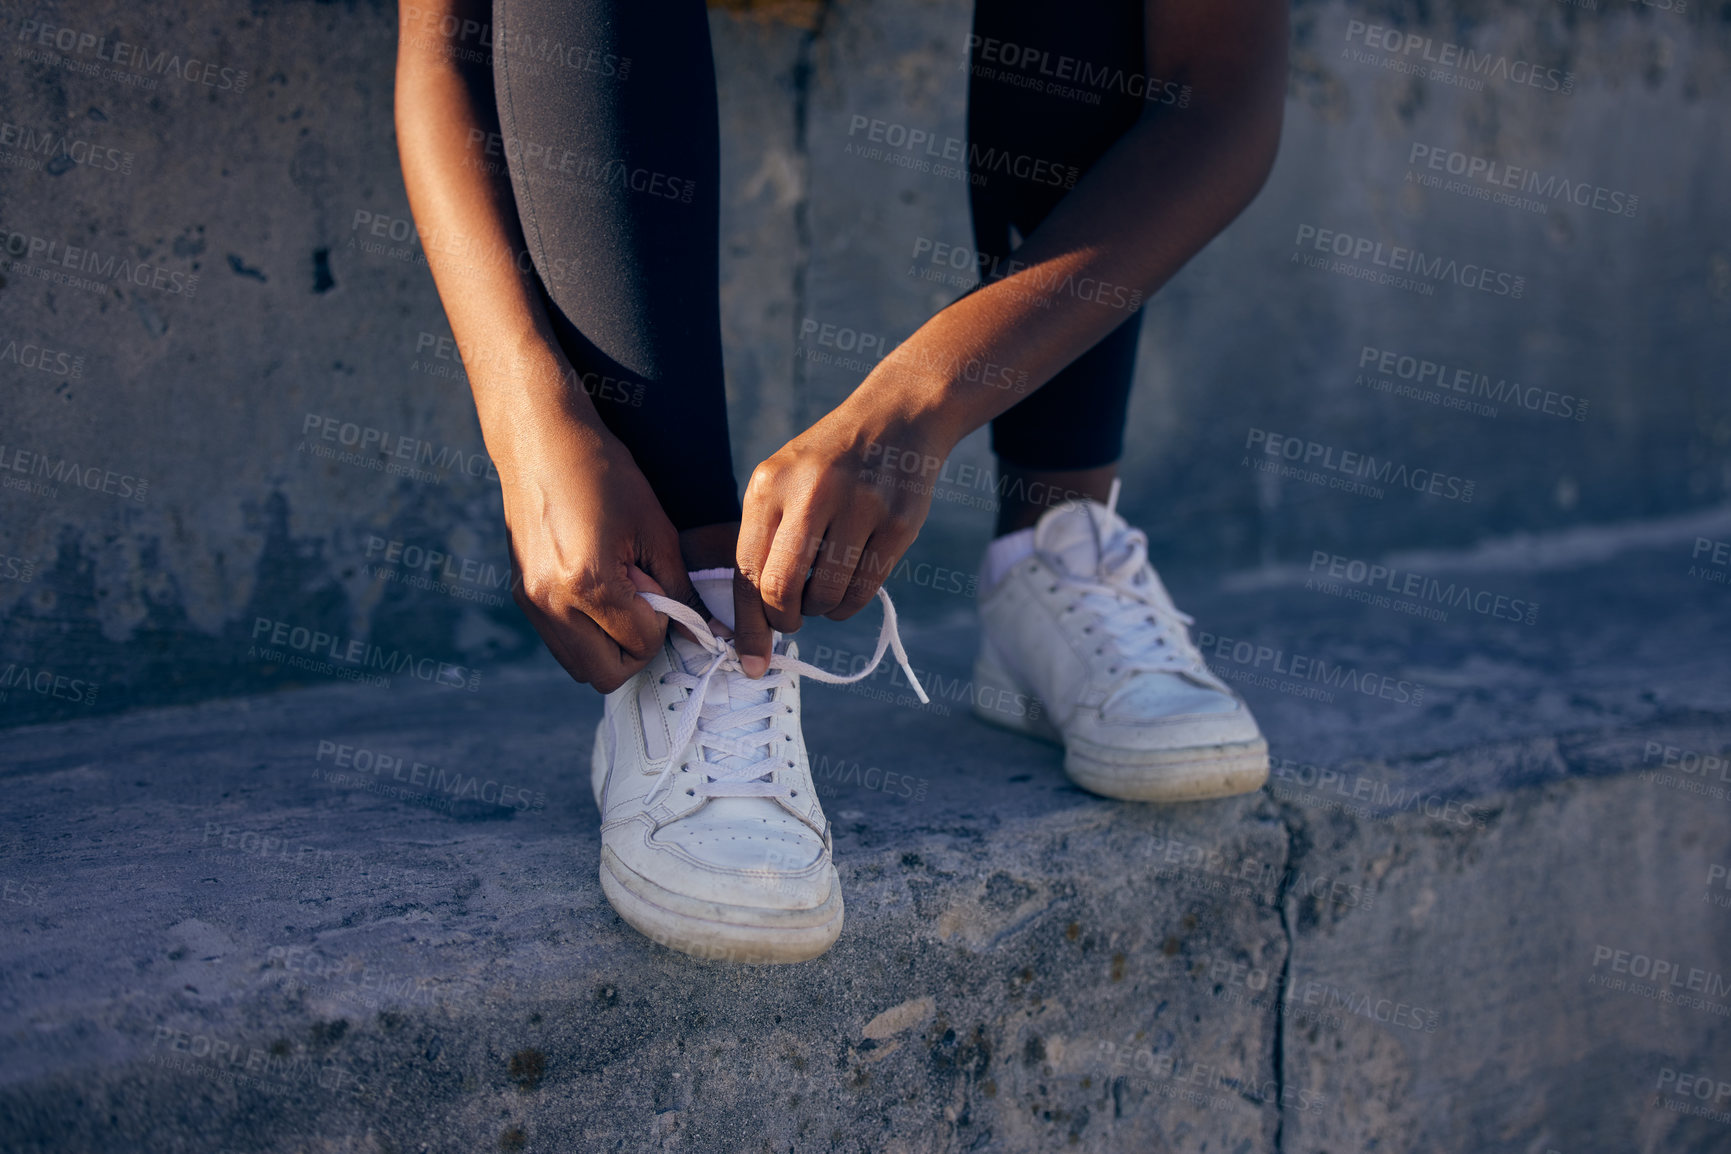 Buy stock photo Hands, fitness and tie shoes outdoor at steps to start workout, training or exercise in city. Sneakers, runner and person tying lace to prepare for sports, health or legs ready for wellness at stairs